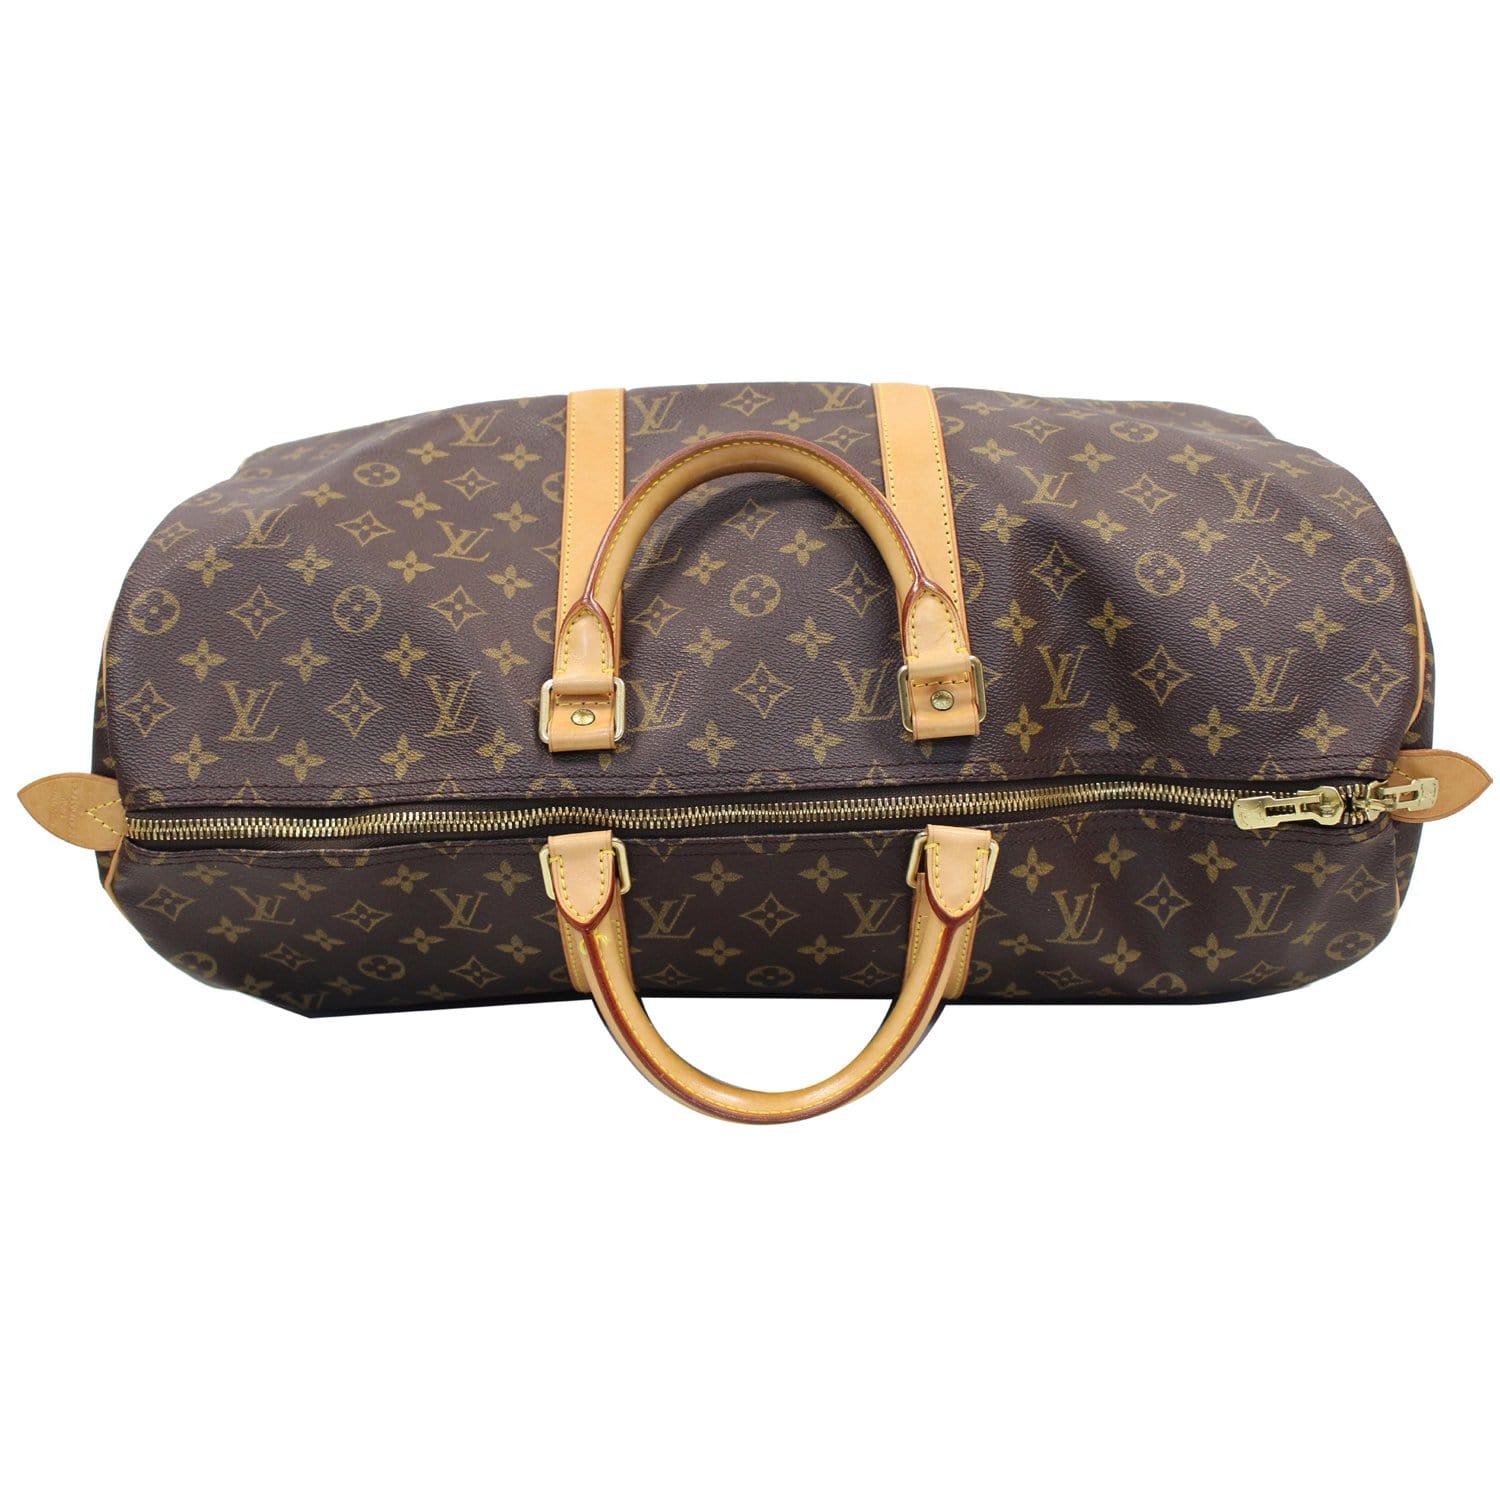 LOUIS VUITTON KEEPALL 50 TRAVEL BAG, monogram canvas with full top